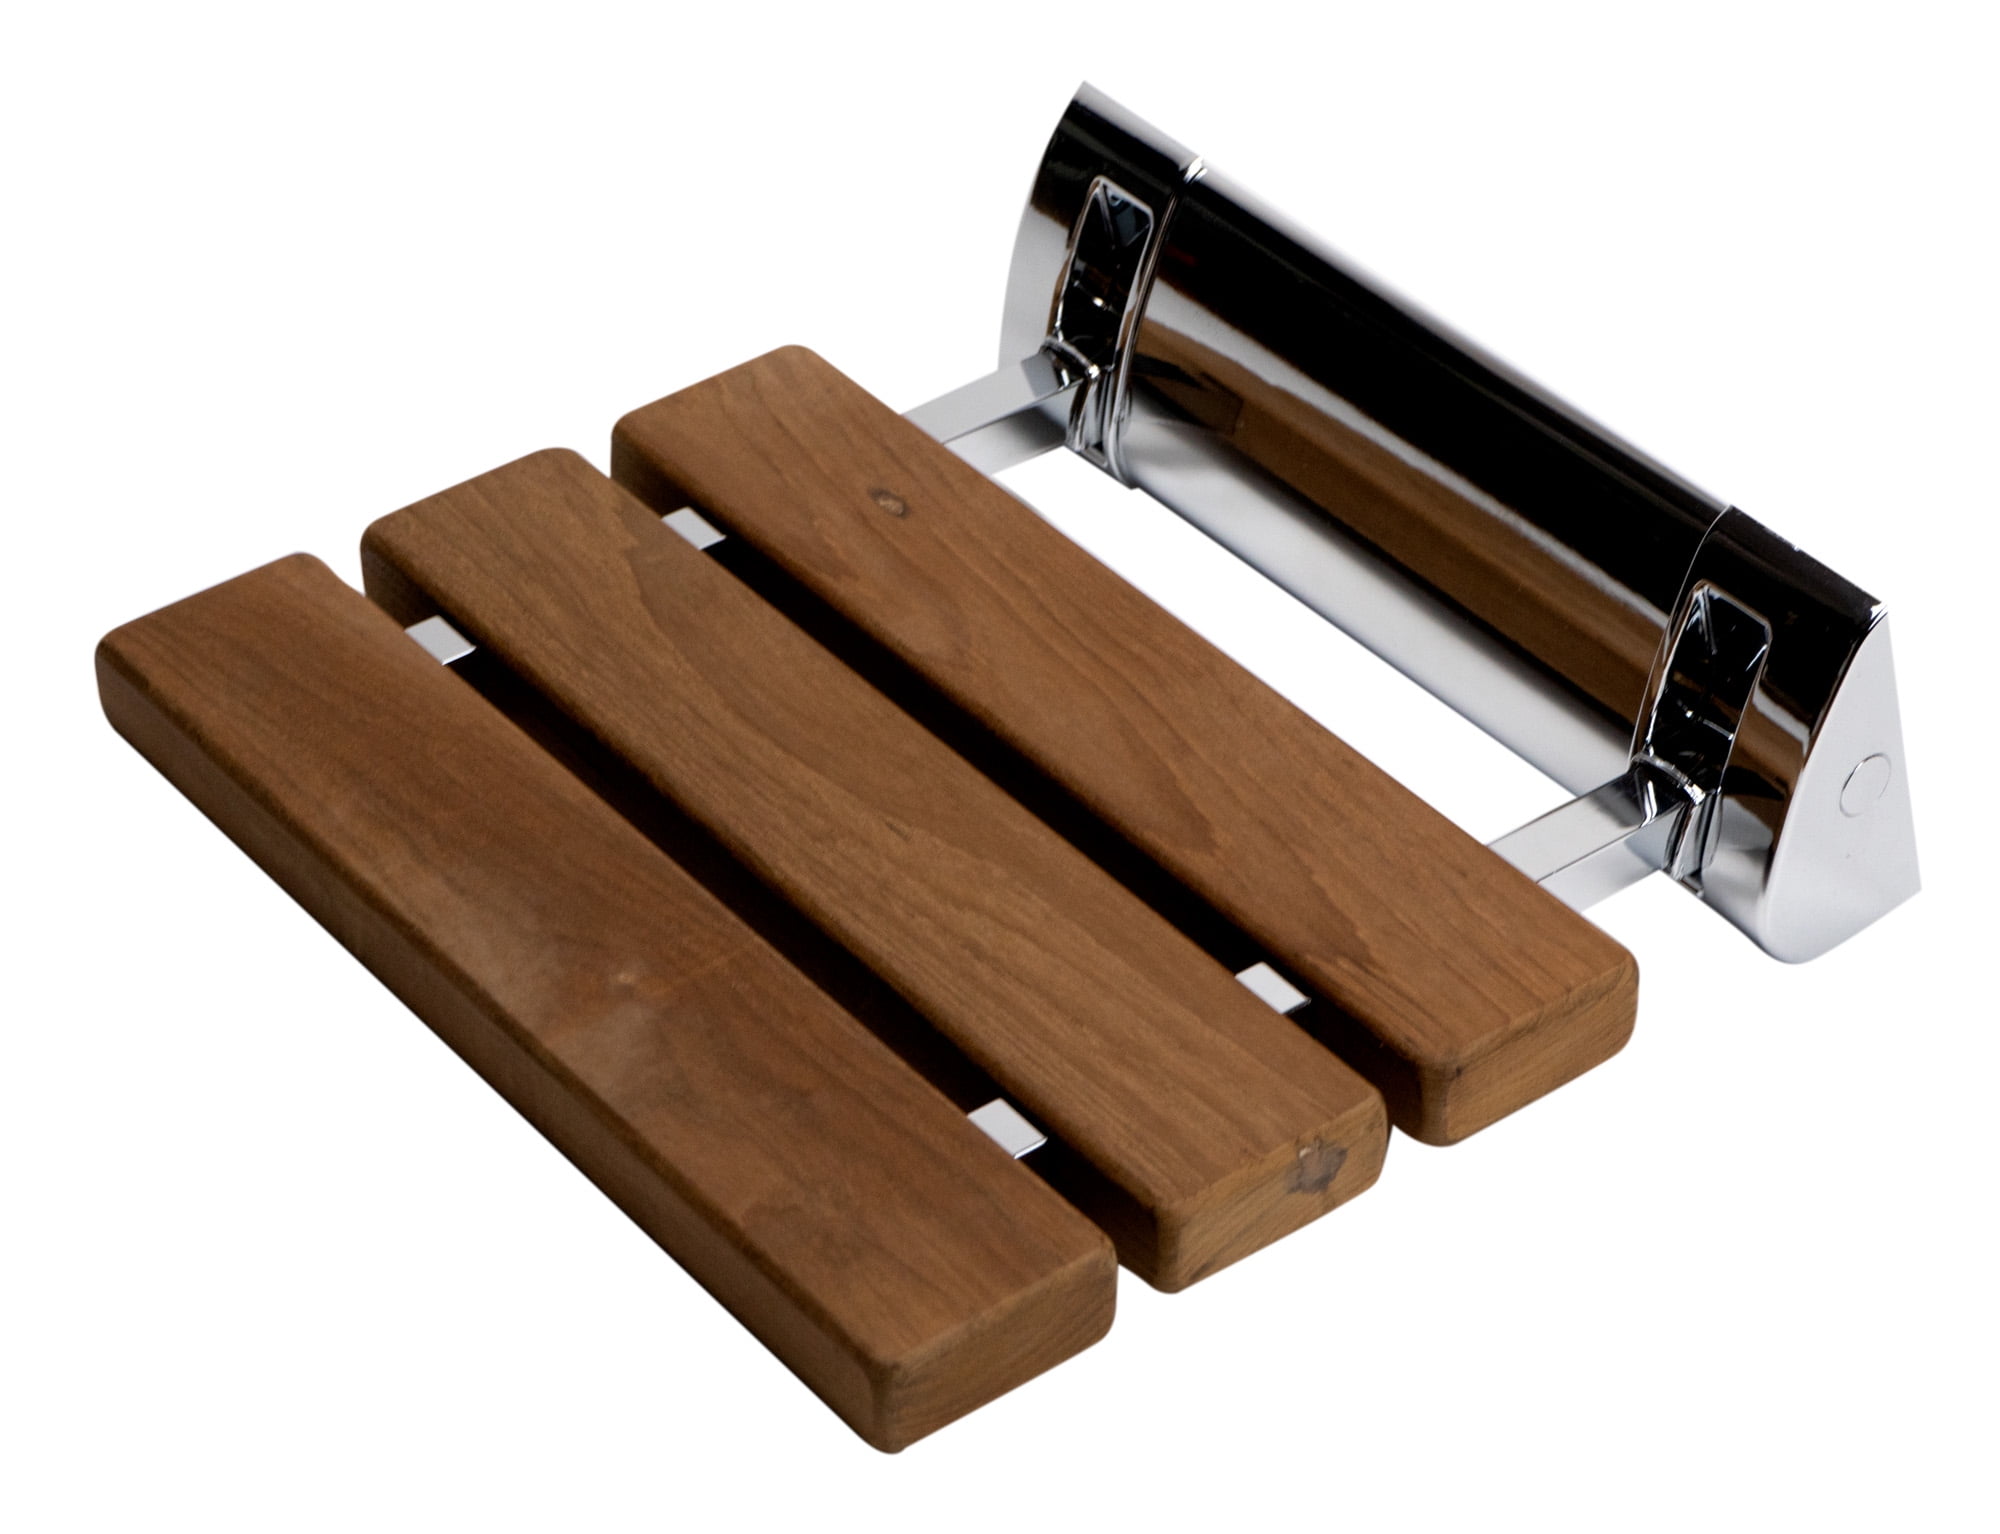 Picture of Alfi Brand ABS14-PC 14 in. Folding Teak Wood Shower Seat Bench with Polished Chrome Joints in Natural Wood